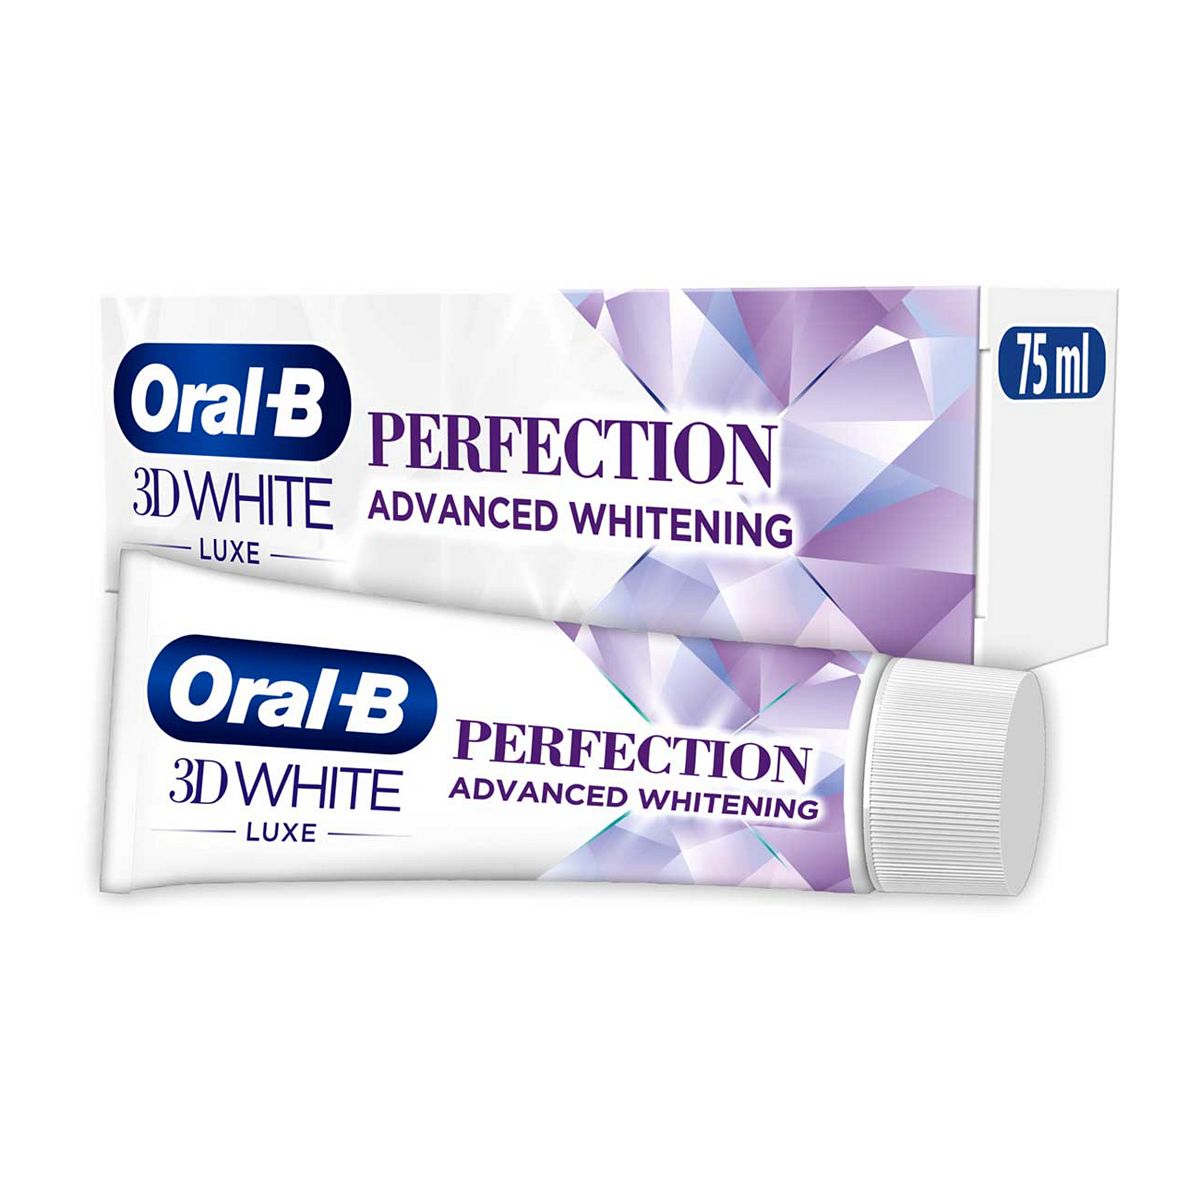 Oral-B 3D White Luxe Perfection Whitening Toothpaste 75ml GOODS Boots   